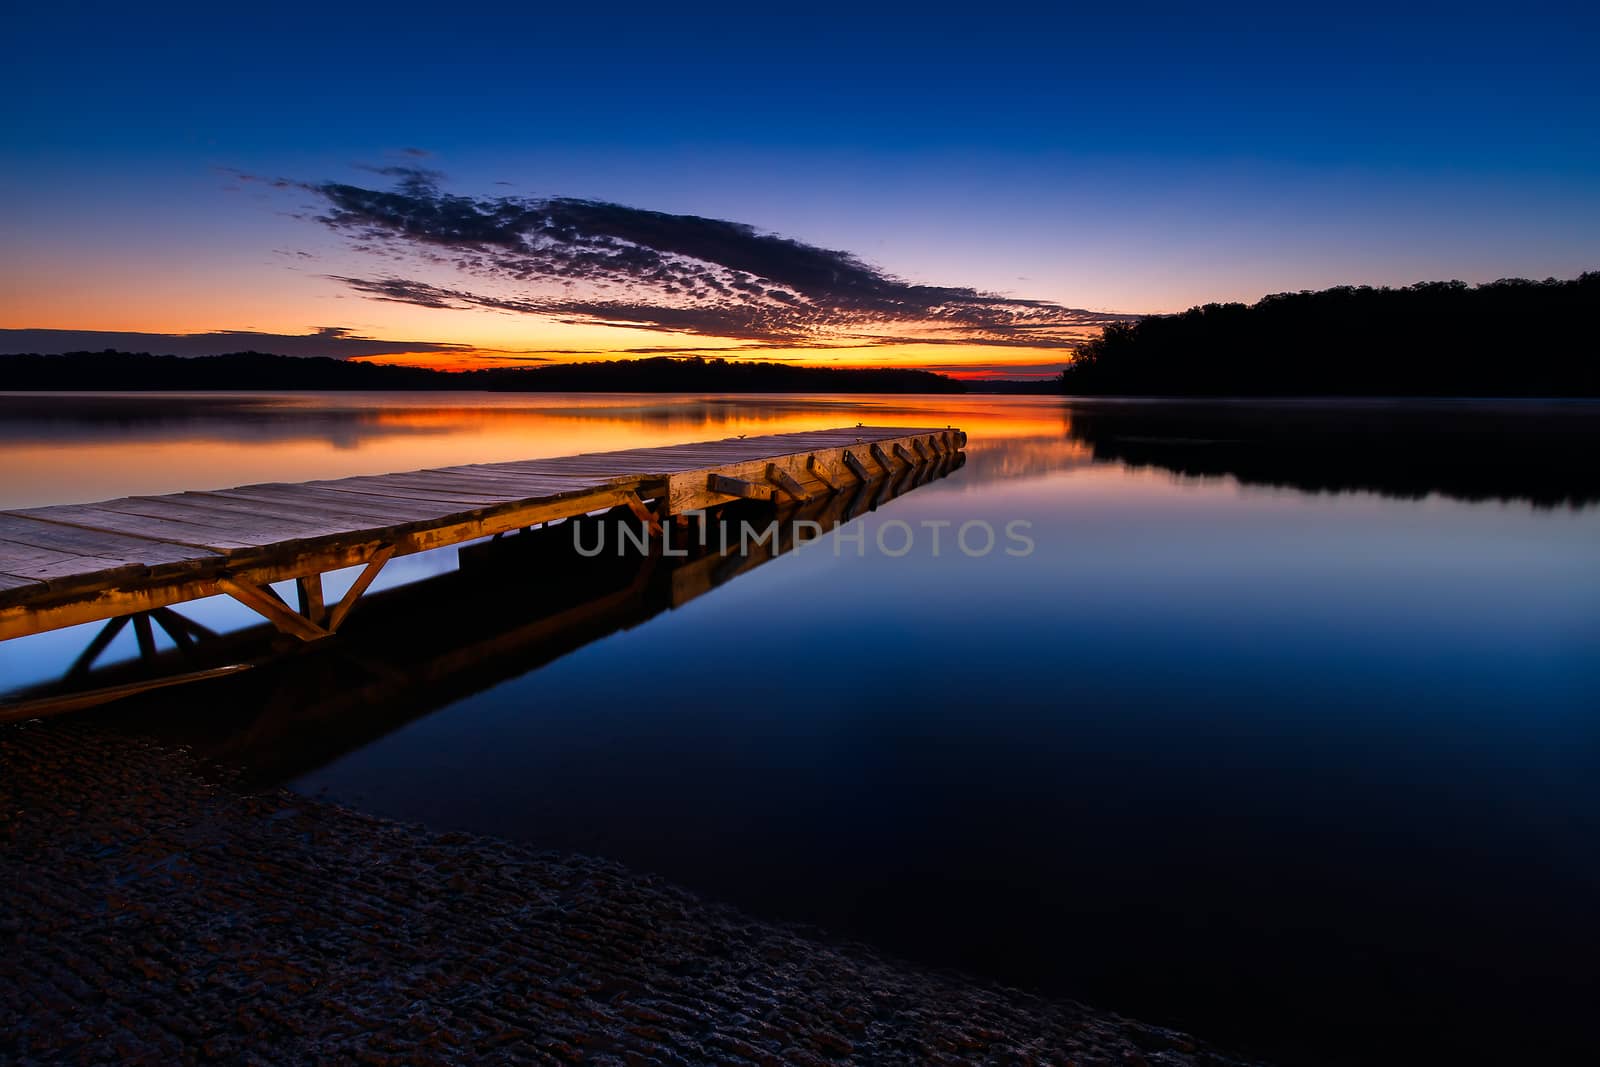 A boatramp and a loading dock before sunrise with vibrant colors in the sky.